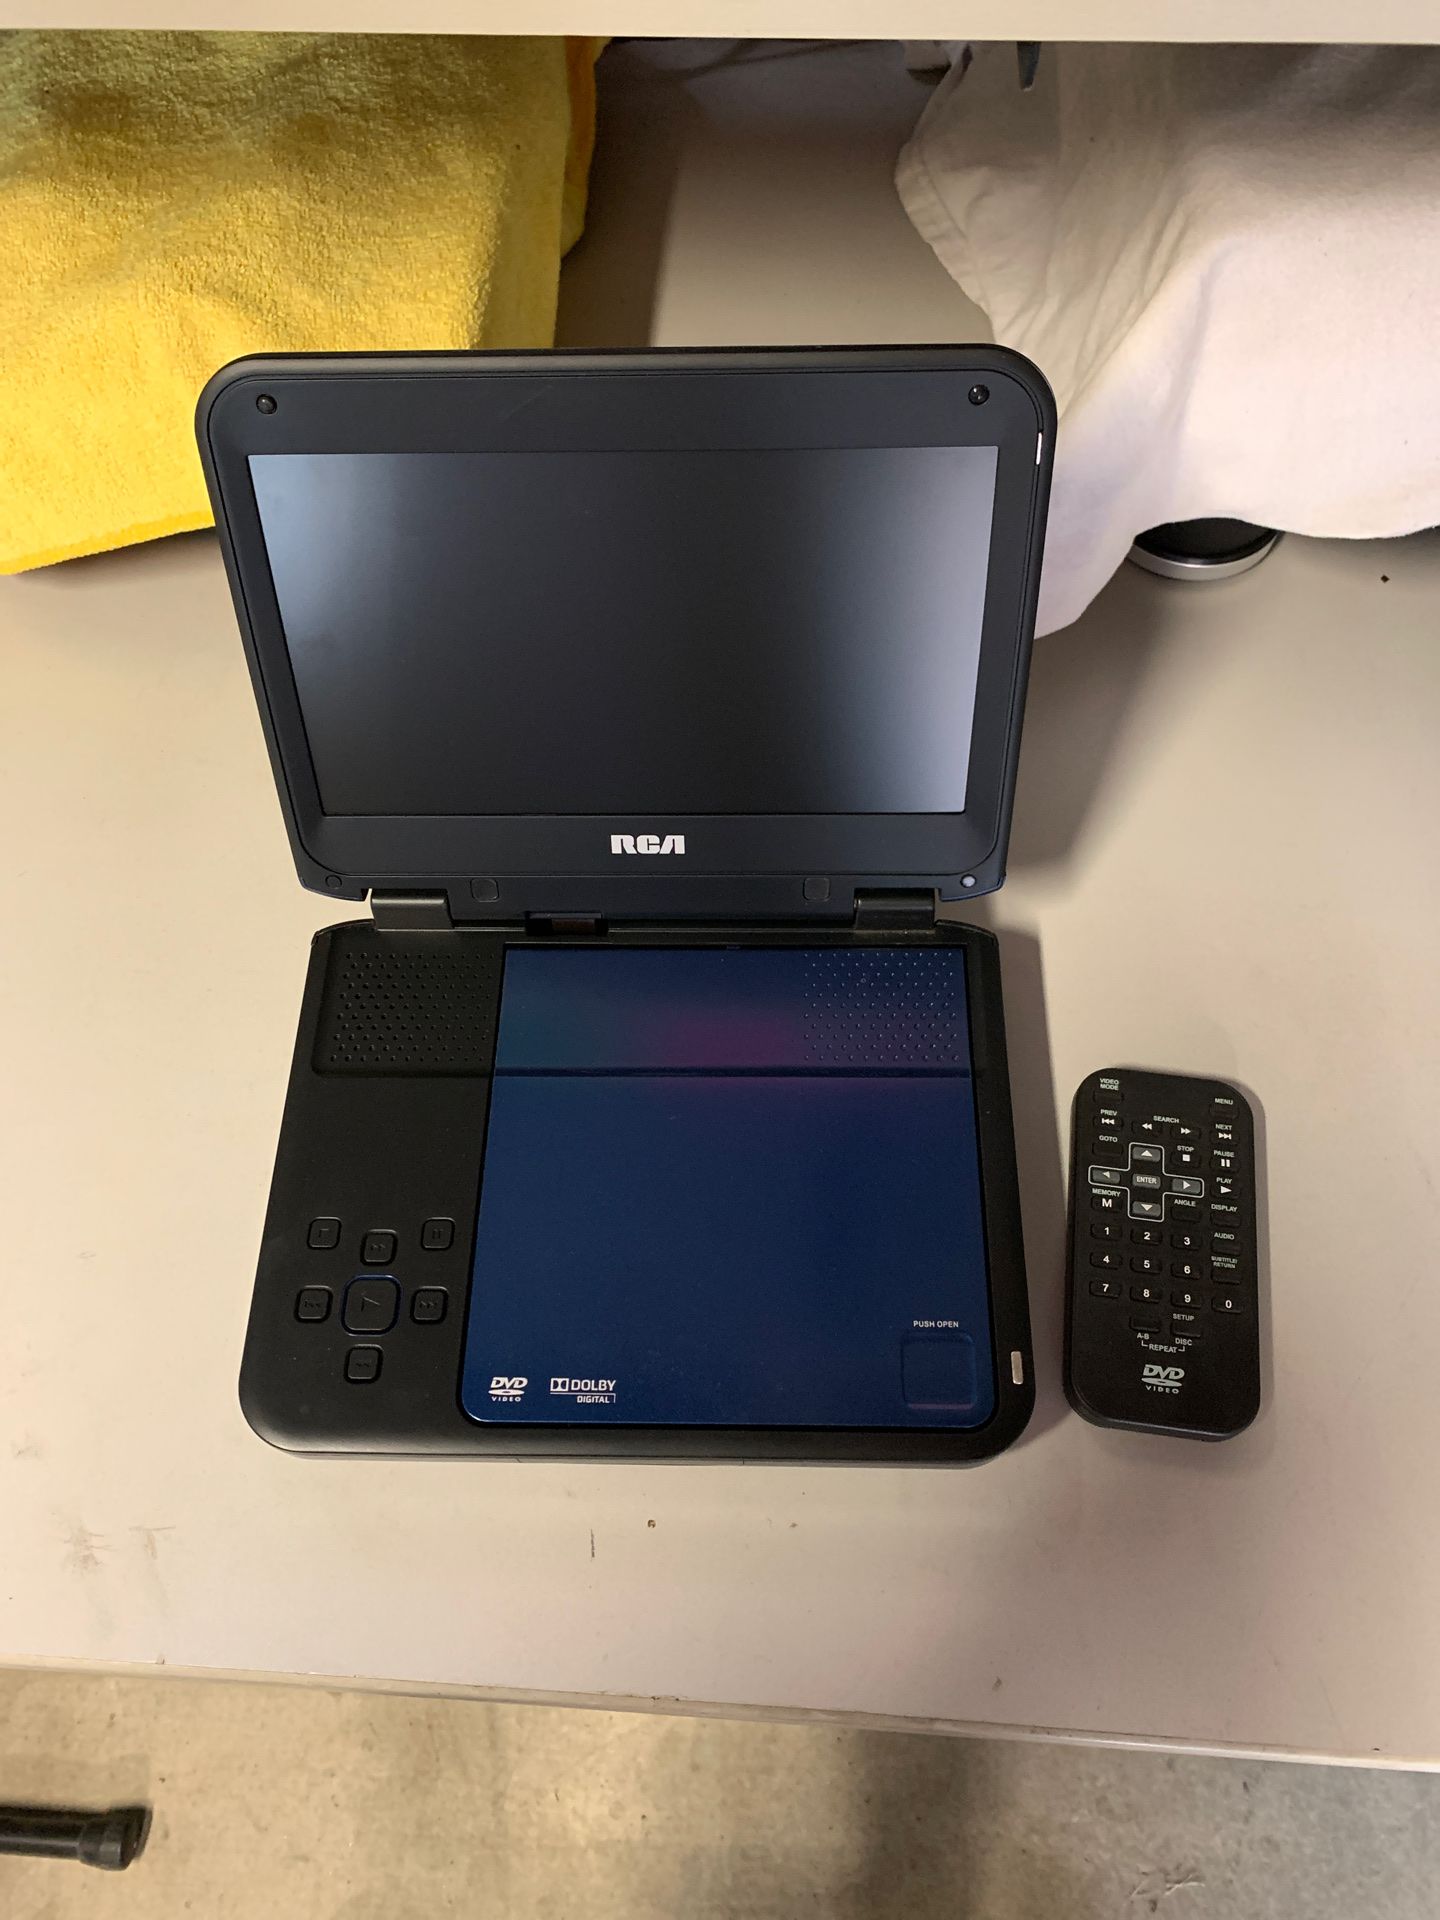 Portable DVD player with screen